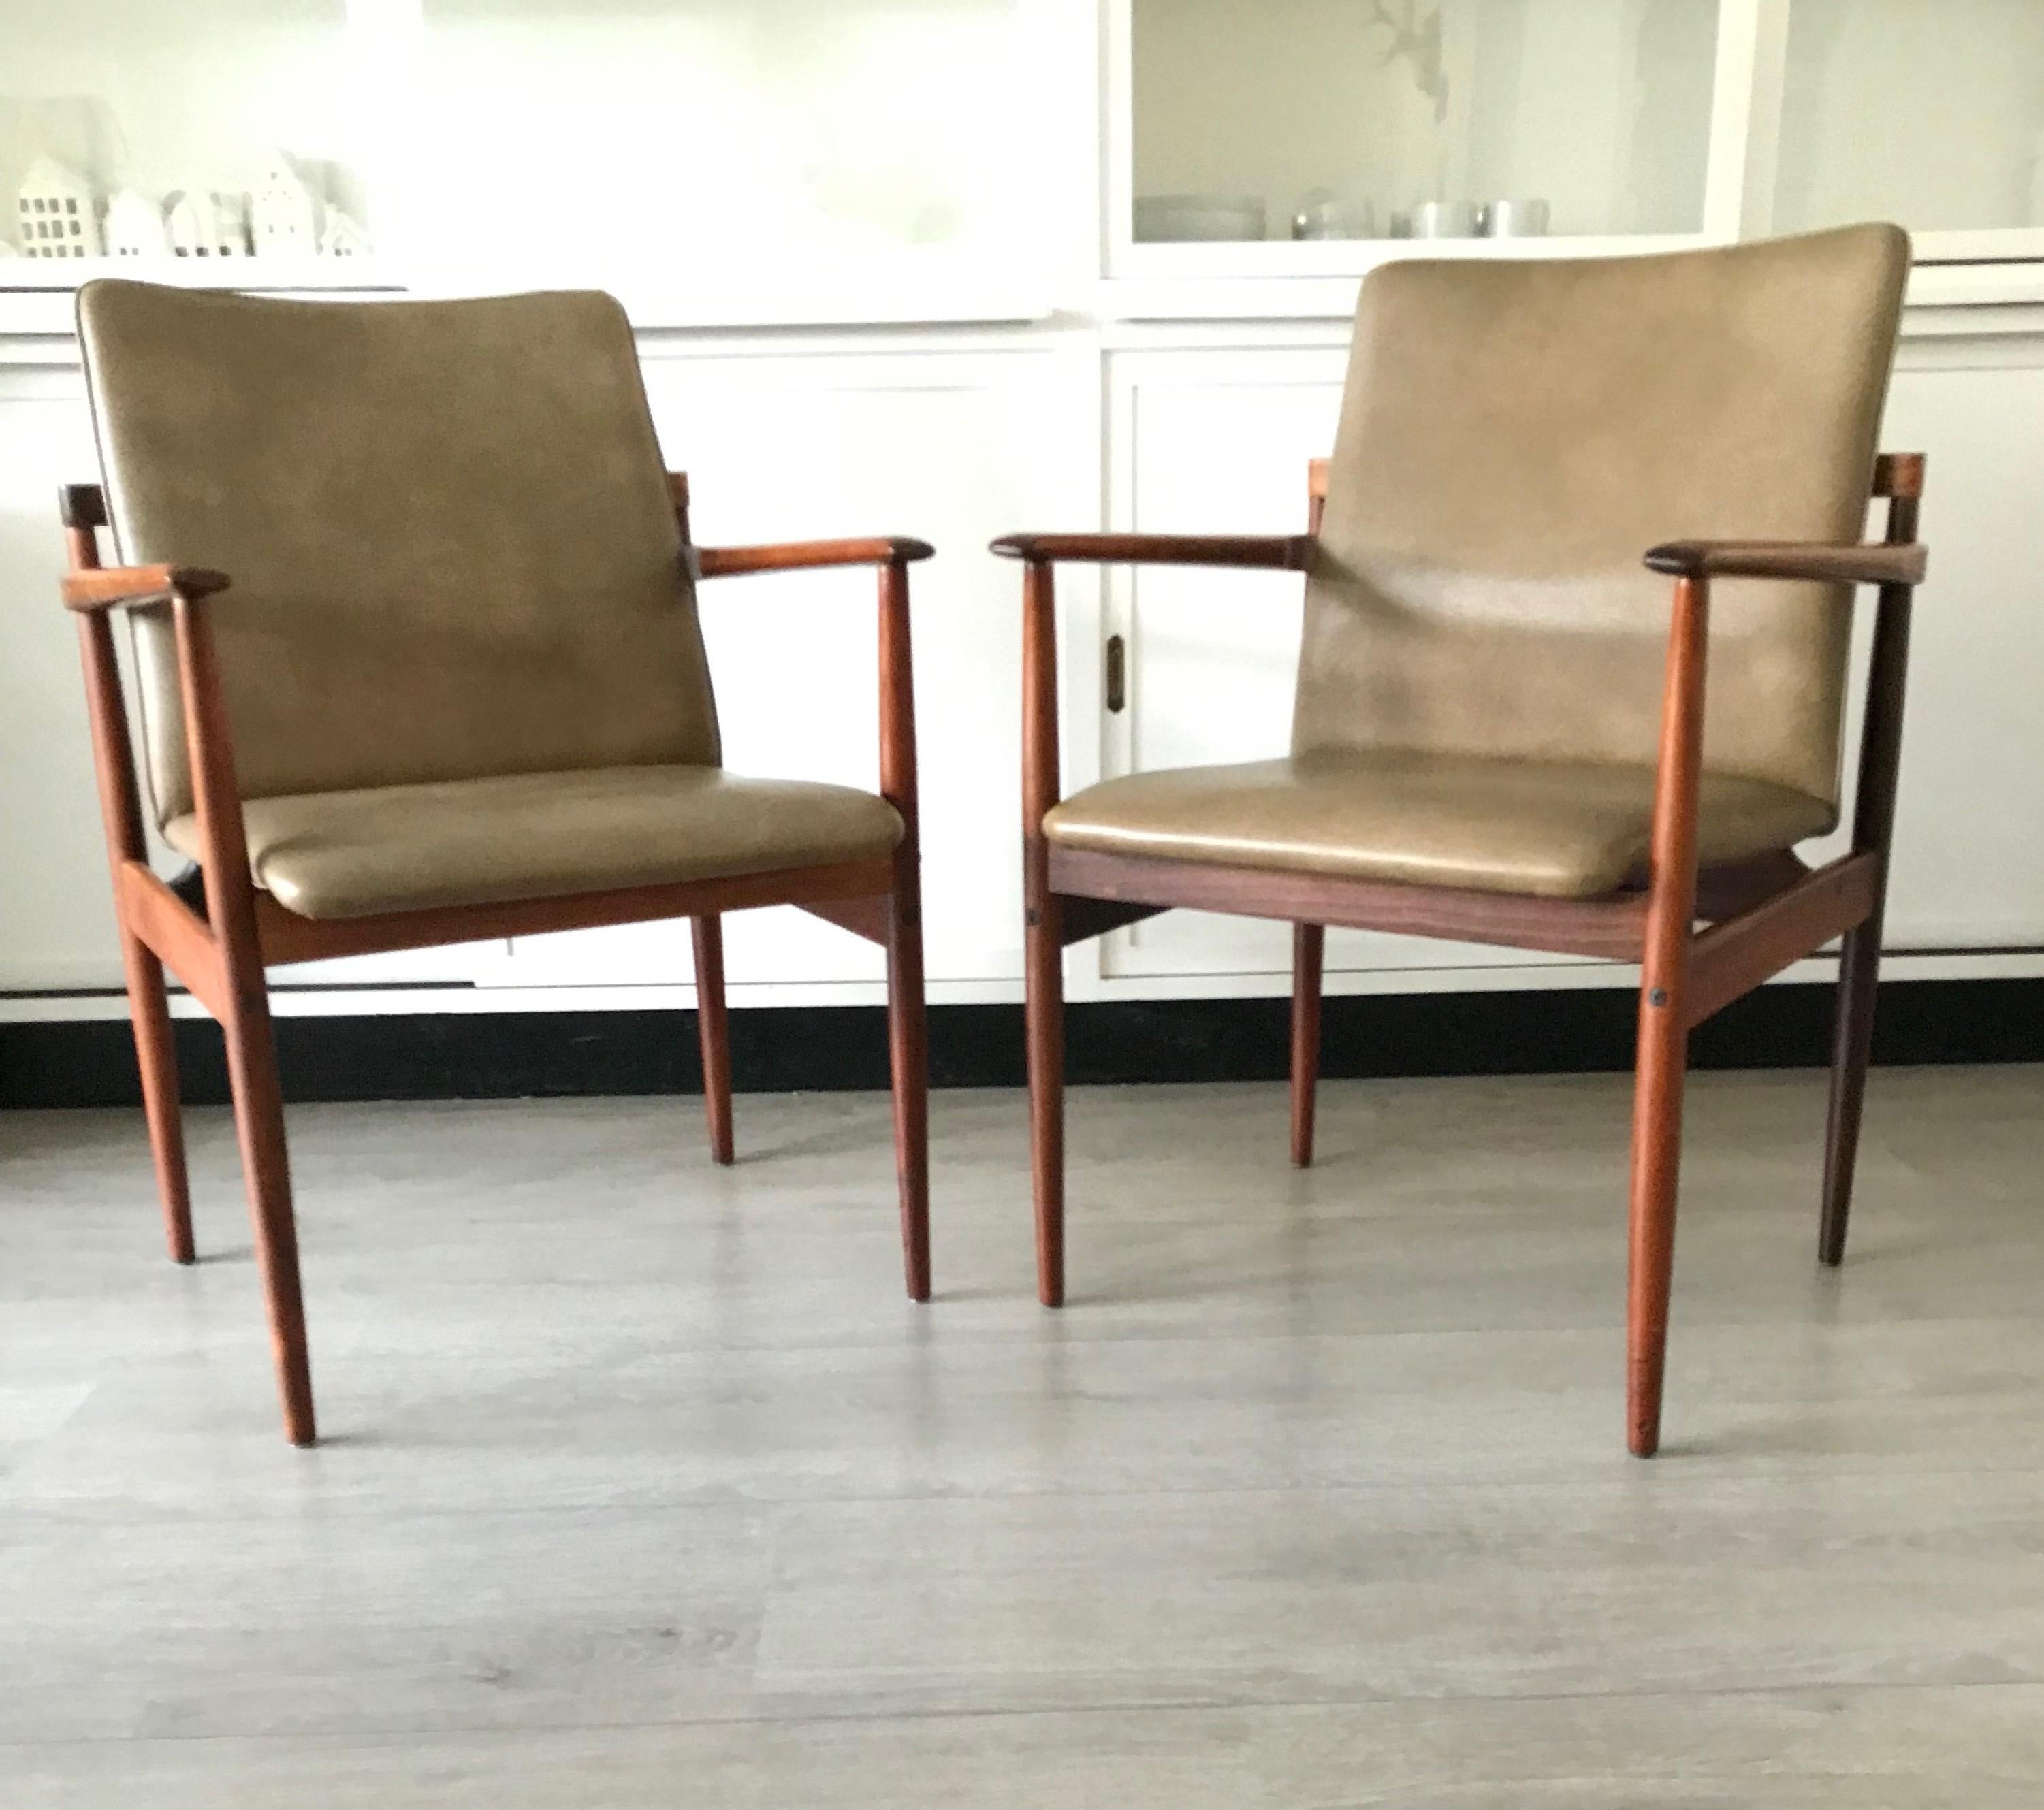 Stunning & Stylish Pair of Handcrafted Midcentury Modern Solid Wooden Armchairs For Sale 4